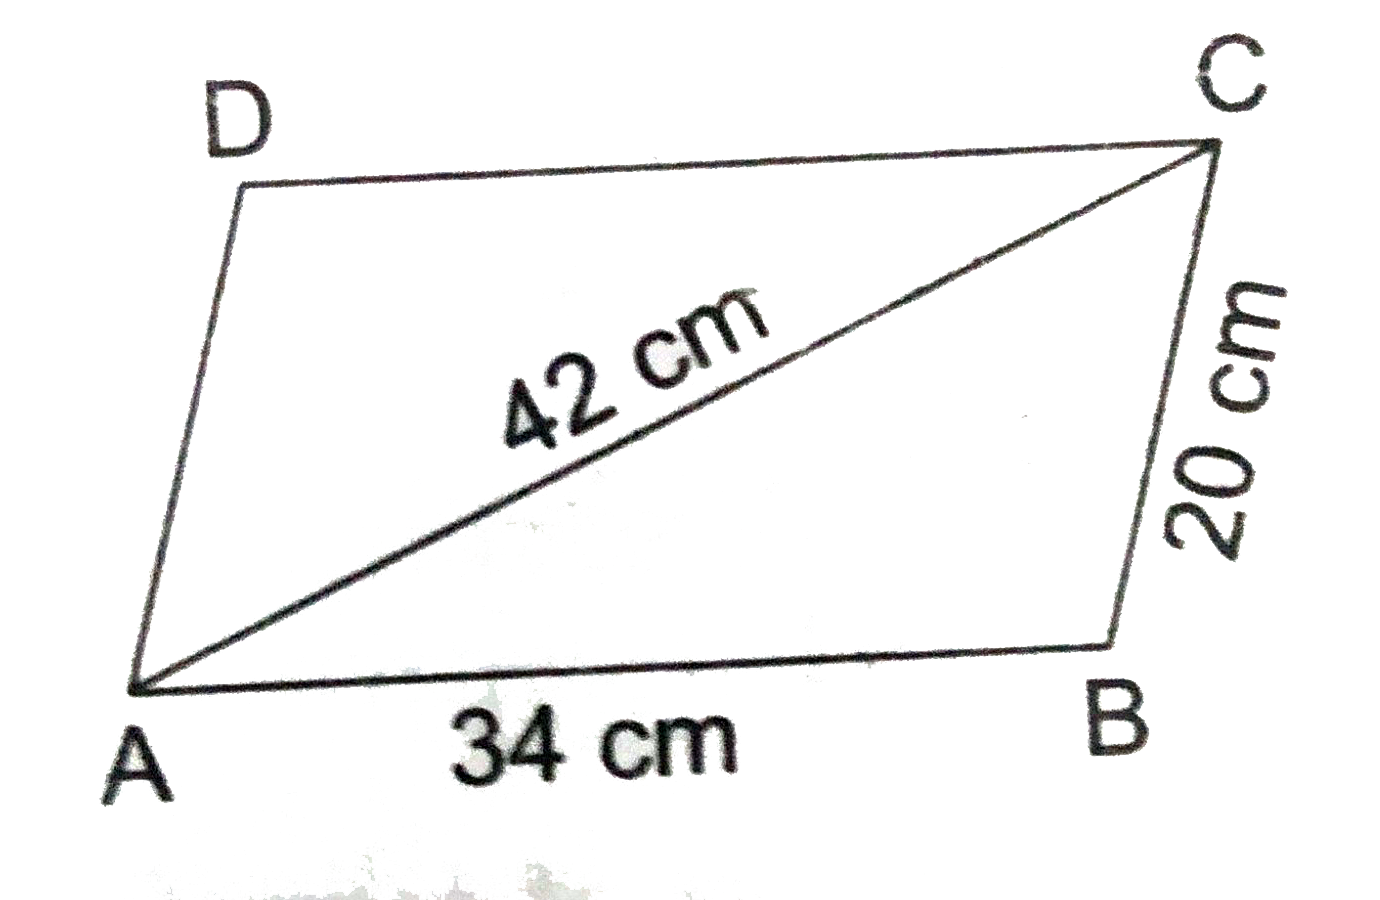 The  adjacent sides of a  parallelogram ABCD  measure  34 cm  and  20 cm  , and the  diagonal ac measures  42 cm . Find the area  of the  parallelogram